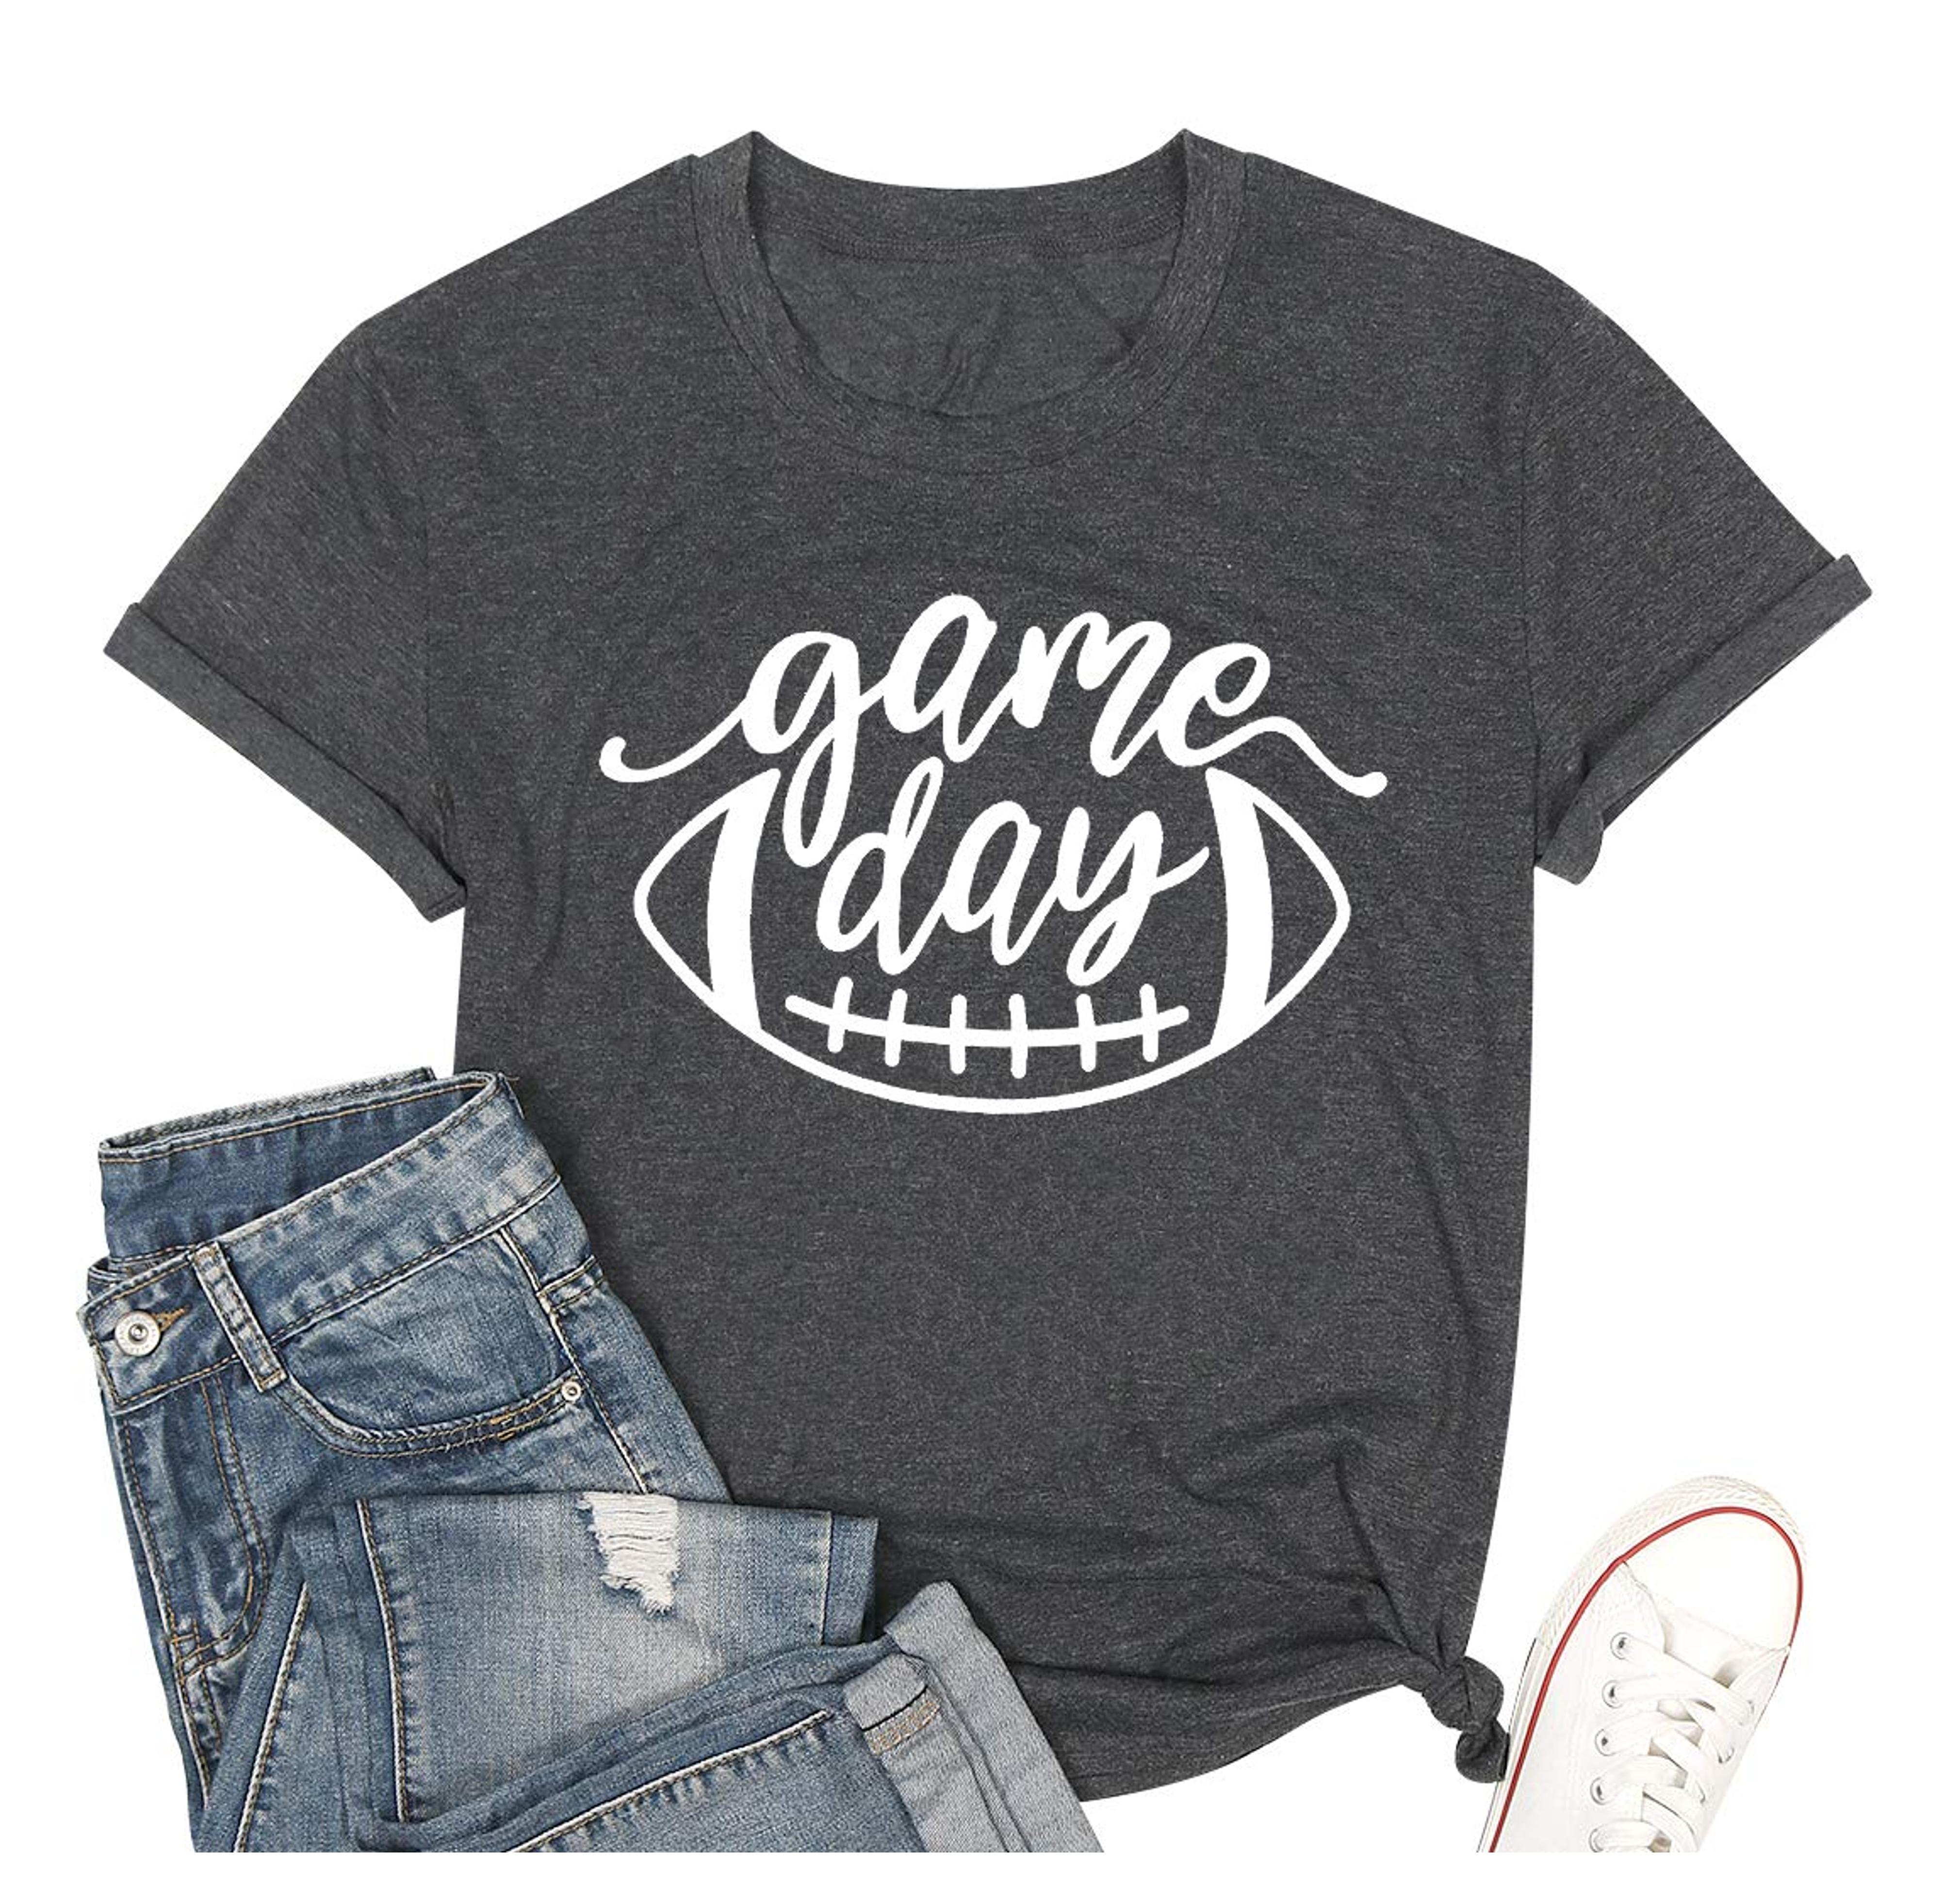 Game Day Football T Shirts Women Cute Football Graphic Tee Tops Funny Sunday Casual Short Sleeve Tee Shirts Dark Grey at Amazon Women’s Clothing store